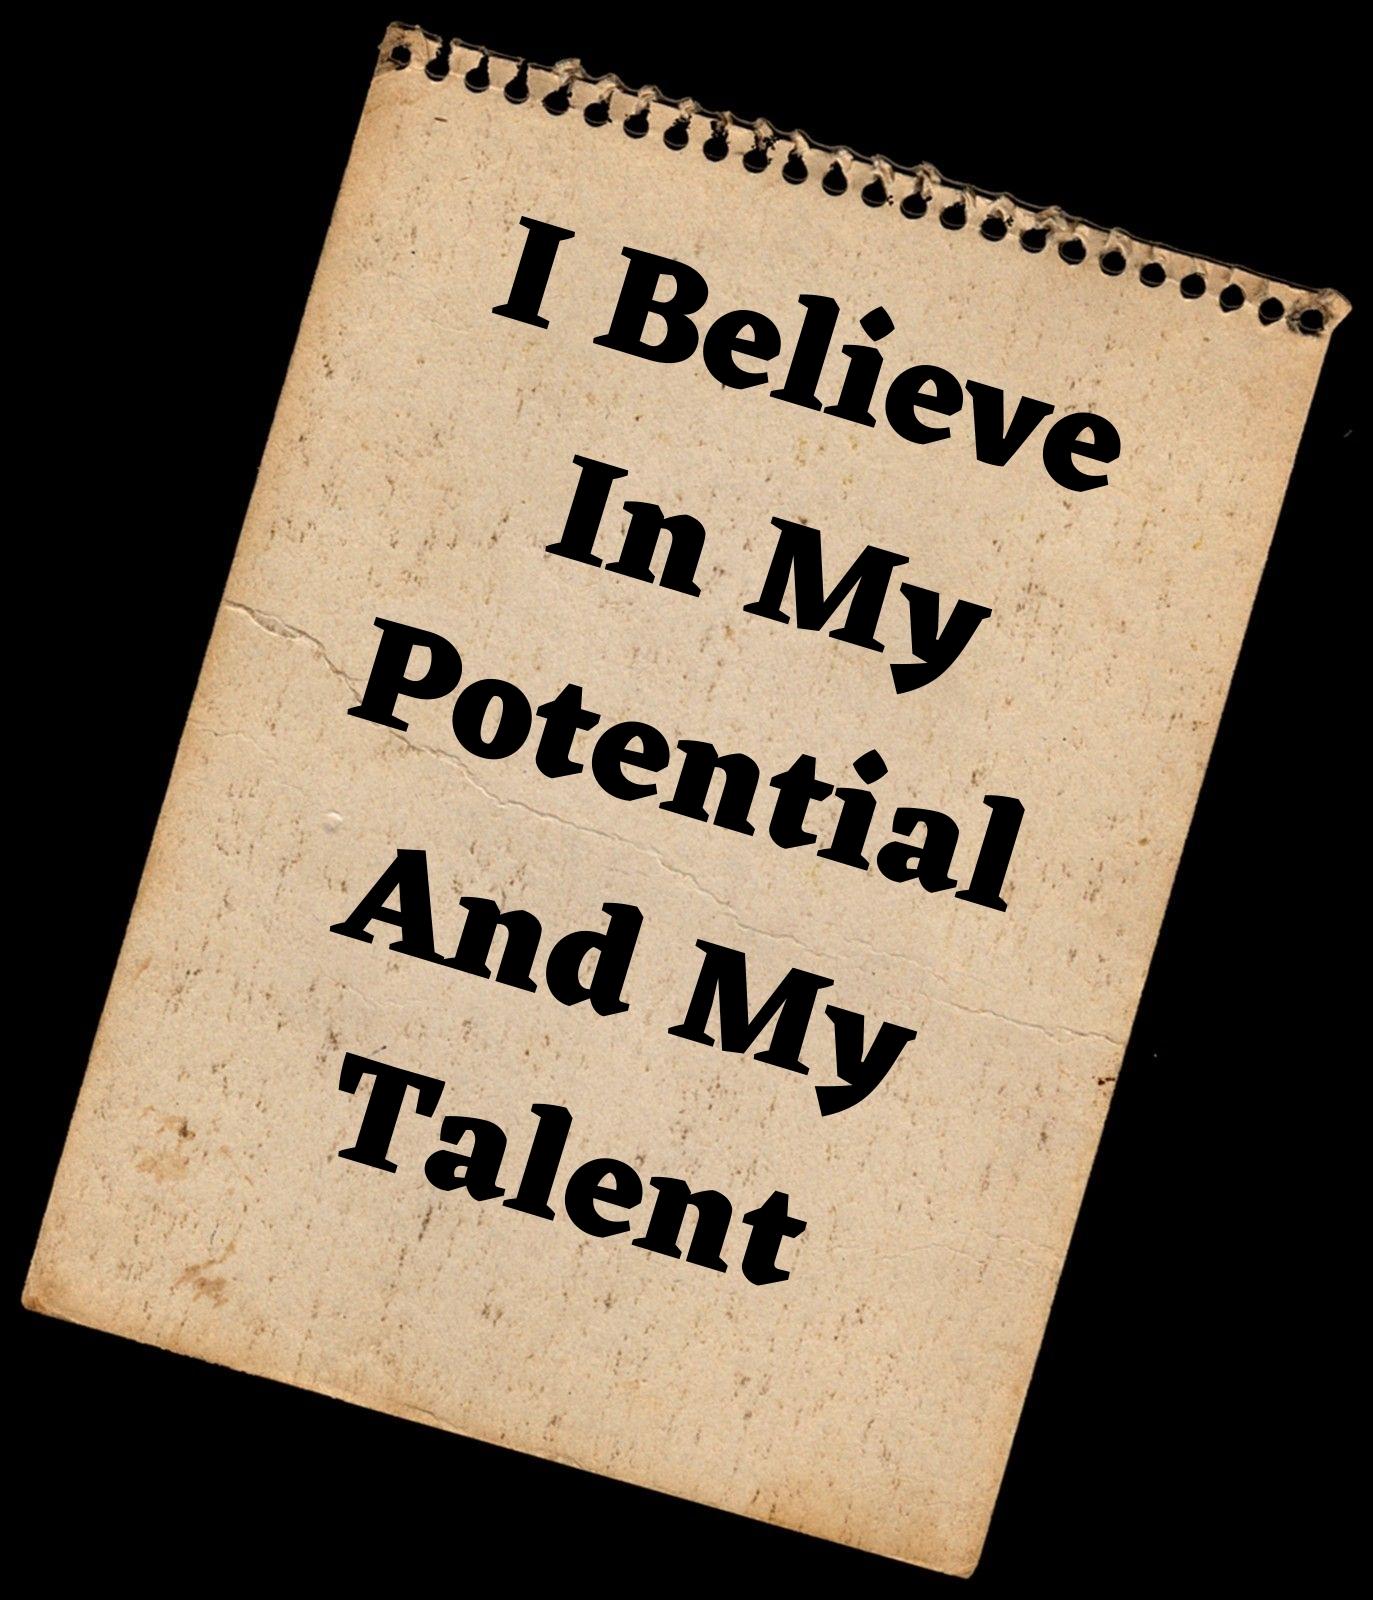 I BELIEVE IN MY POTENTIAL AND MY TALENT.